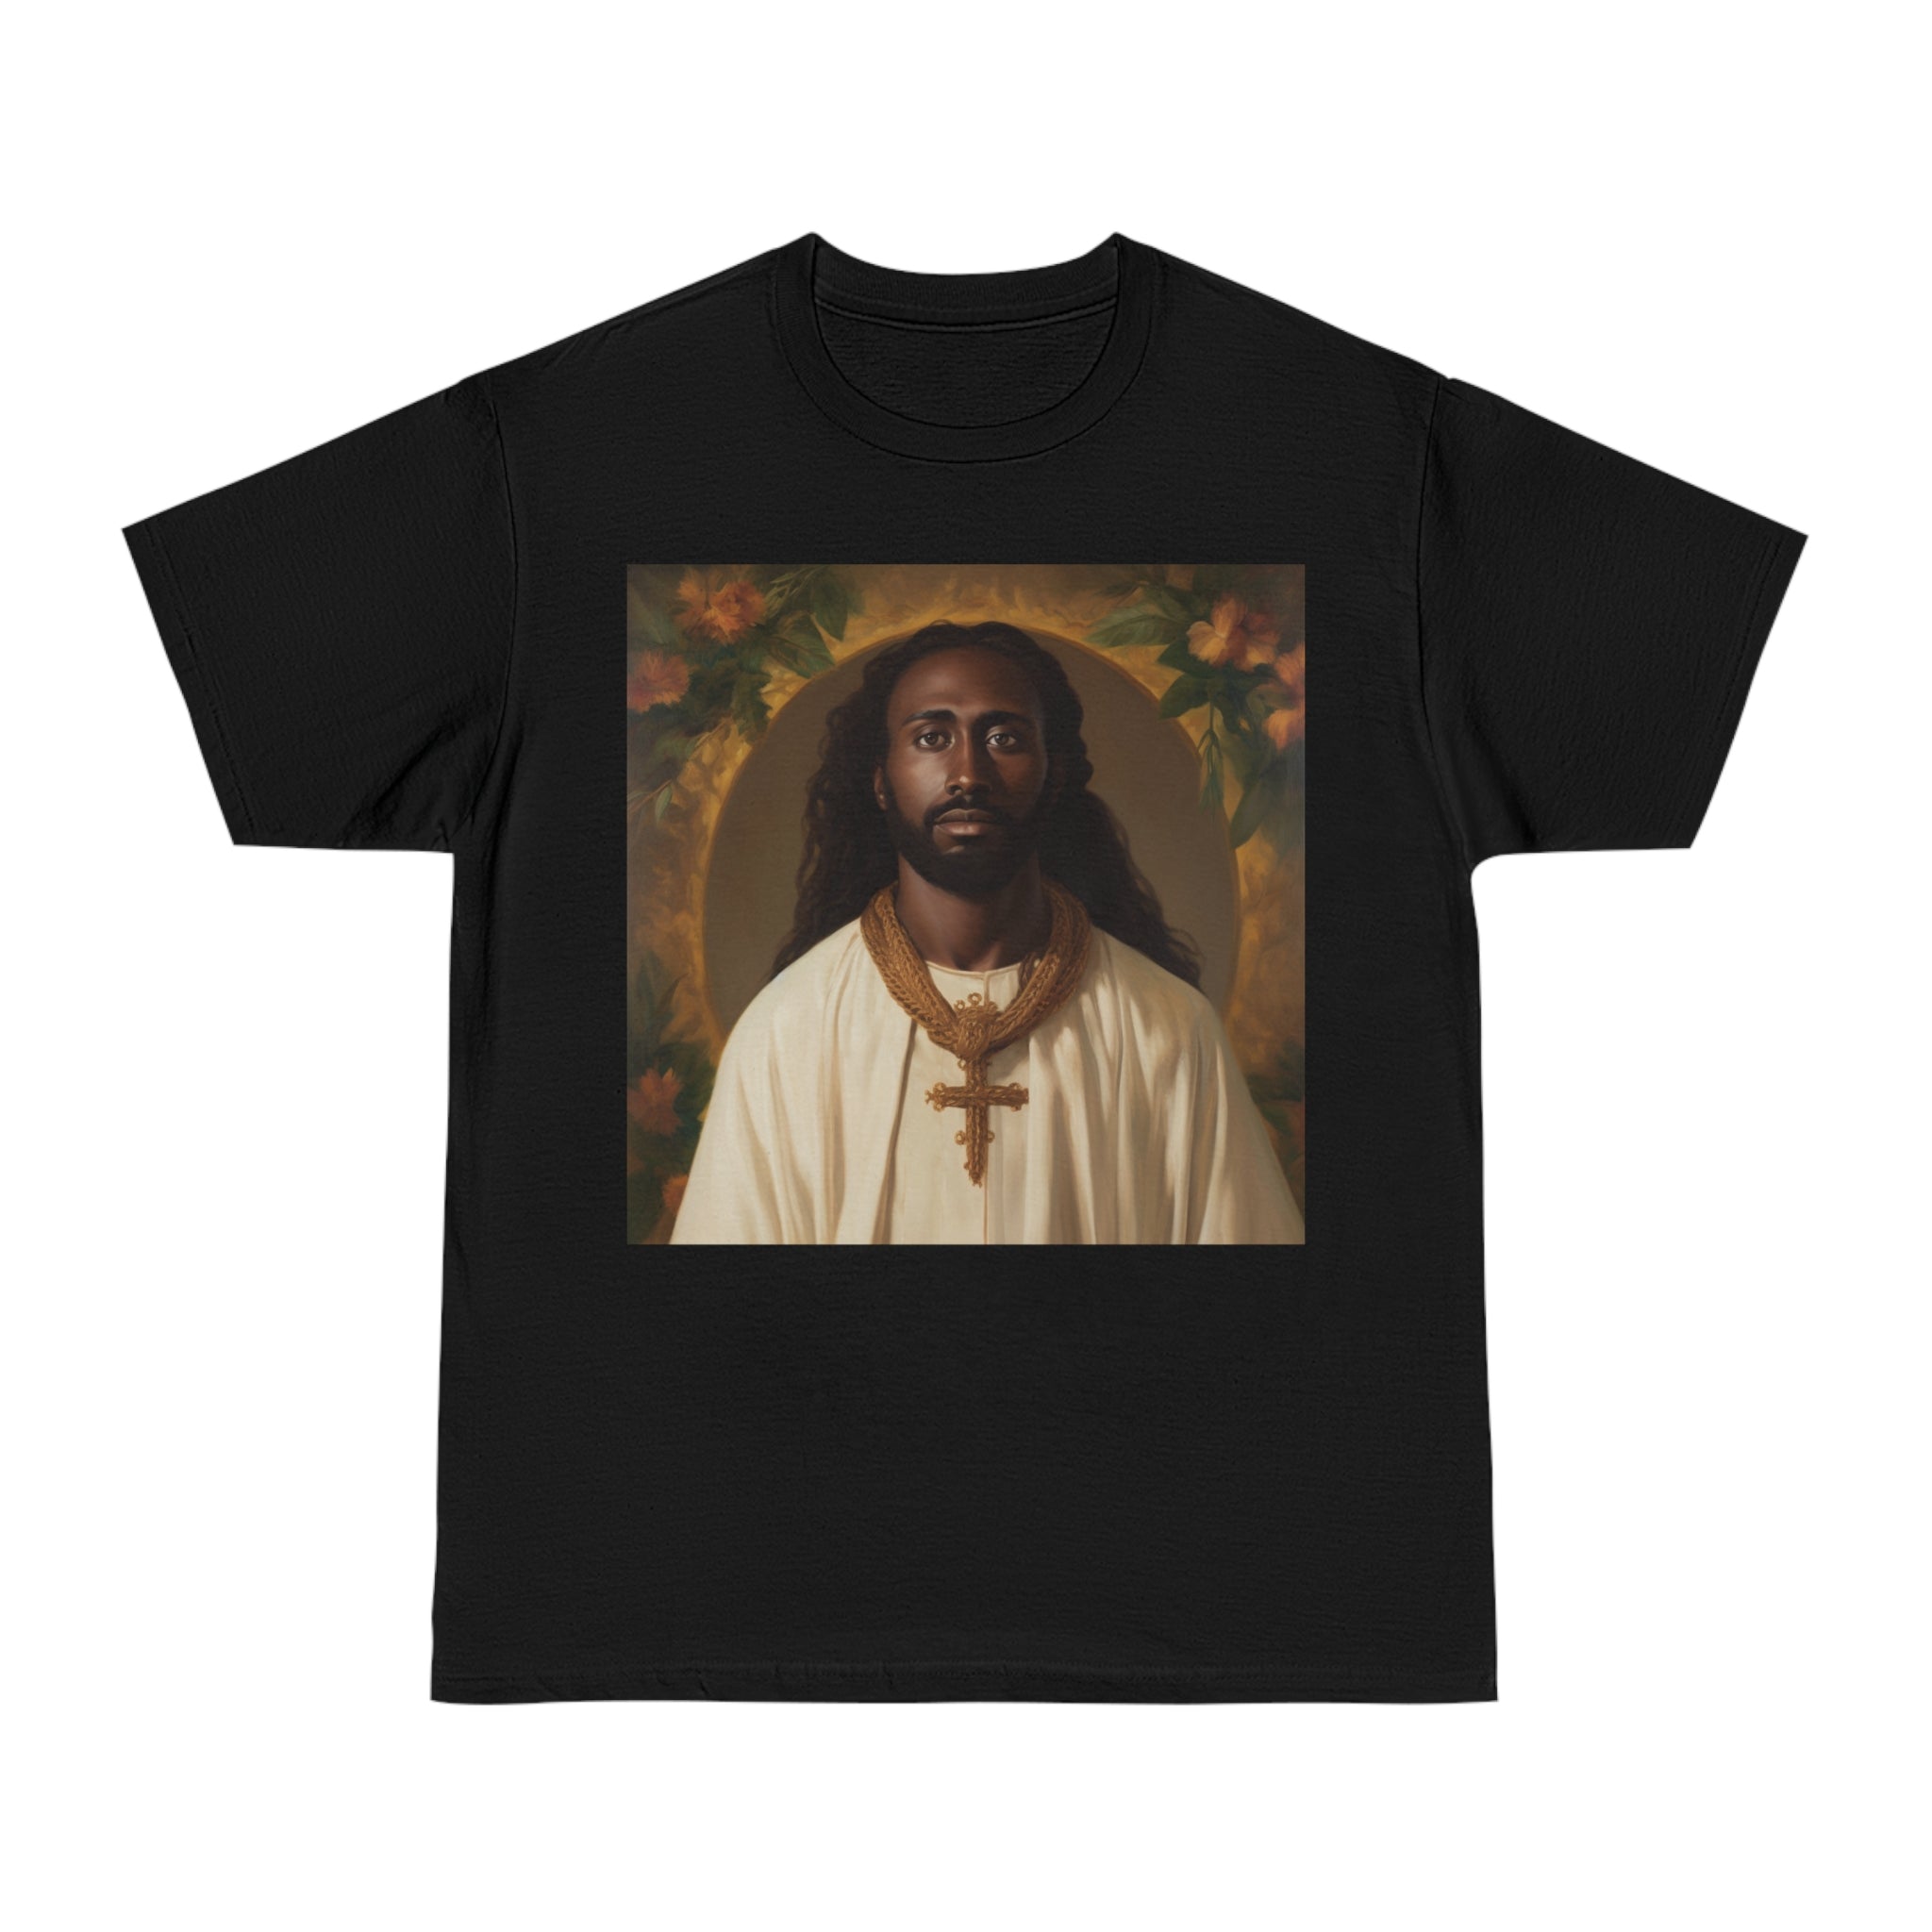 This image displays a high-quality unisex Hammer™ T-shirt featuring an inspiring design based on a Mormon painting of Jesus of African descent. The t-shirt is presented in a neutral color that highlights the detailed and vibrant artwork, designed to resonate with a wide audience and celebrate diversity in spirituality.